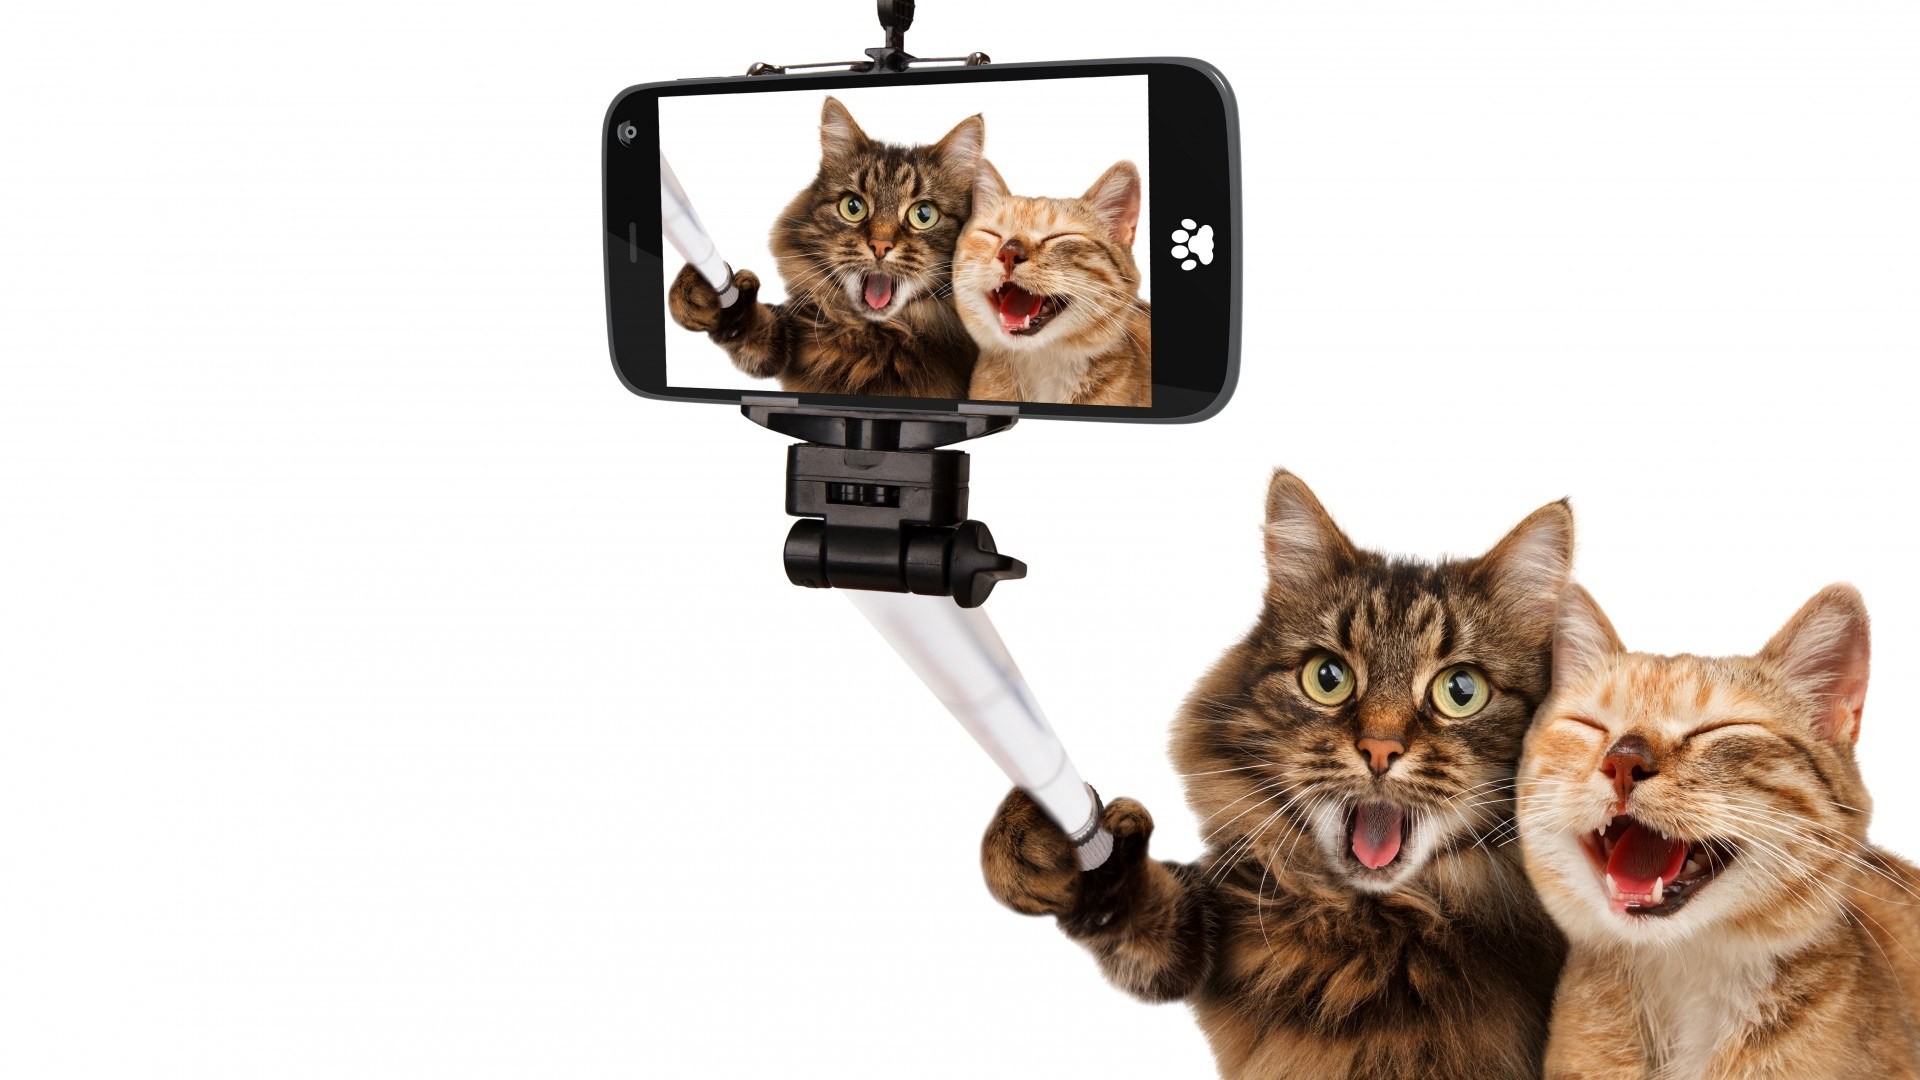 General 1920x1080 animals cats pet selfies smartphone selfie stick humor white background photo manipulation laughing photoshopped camera